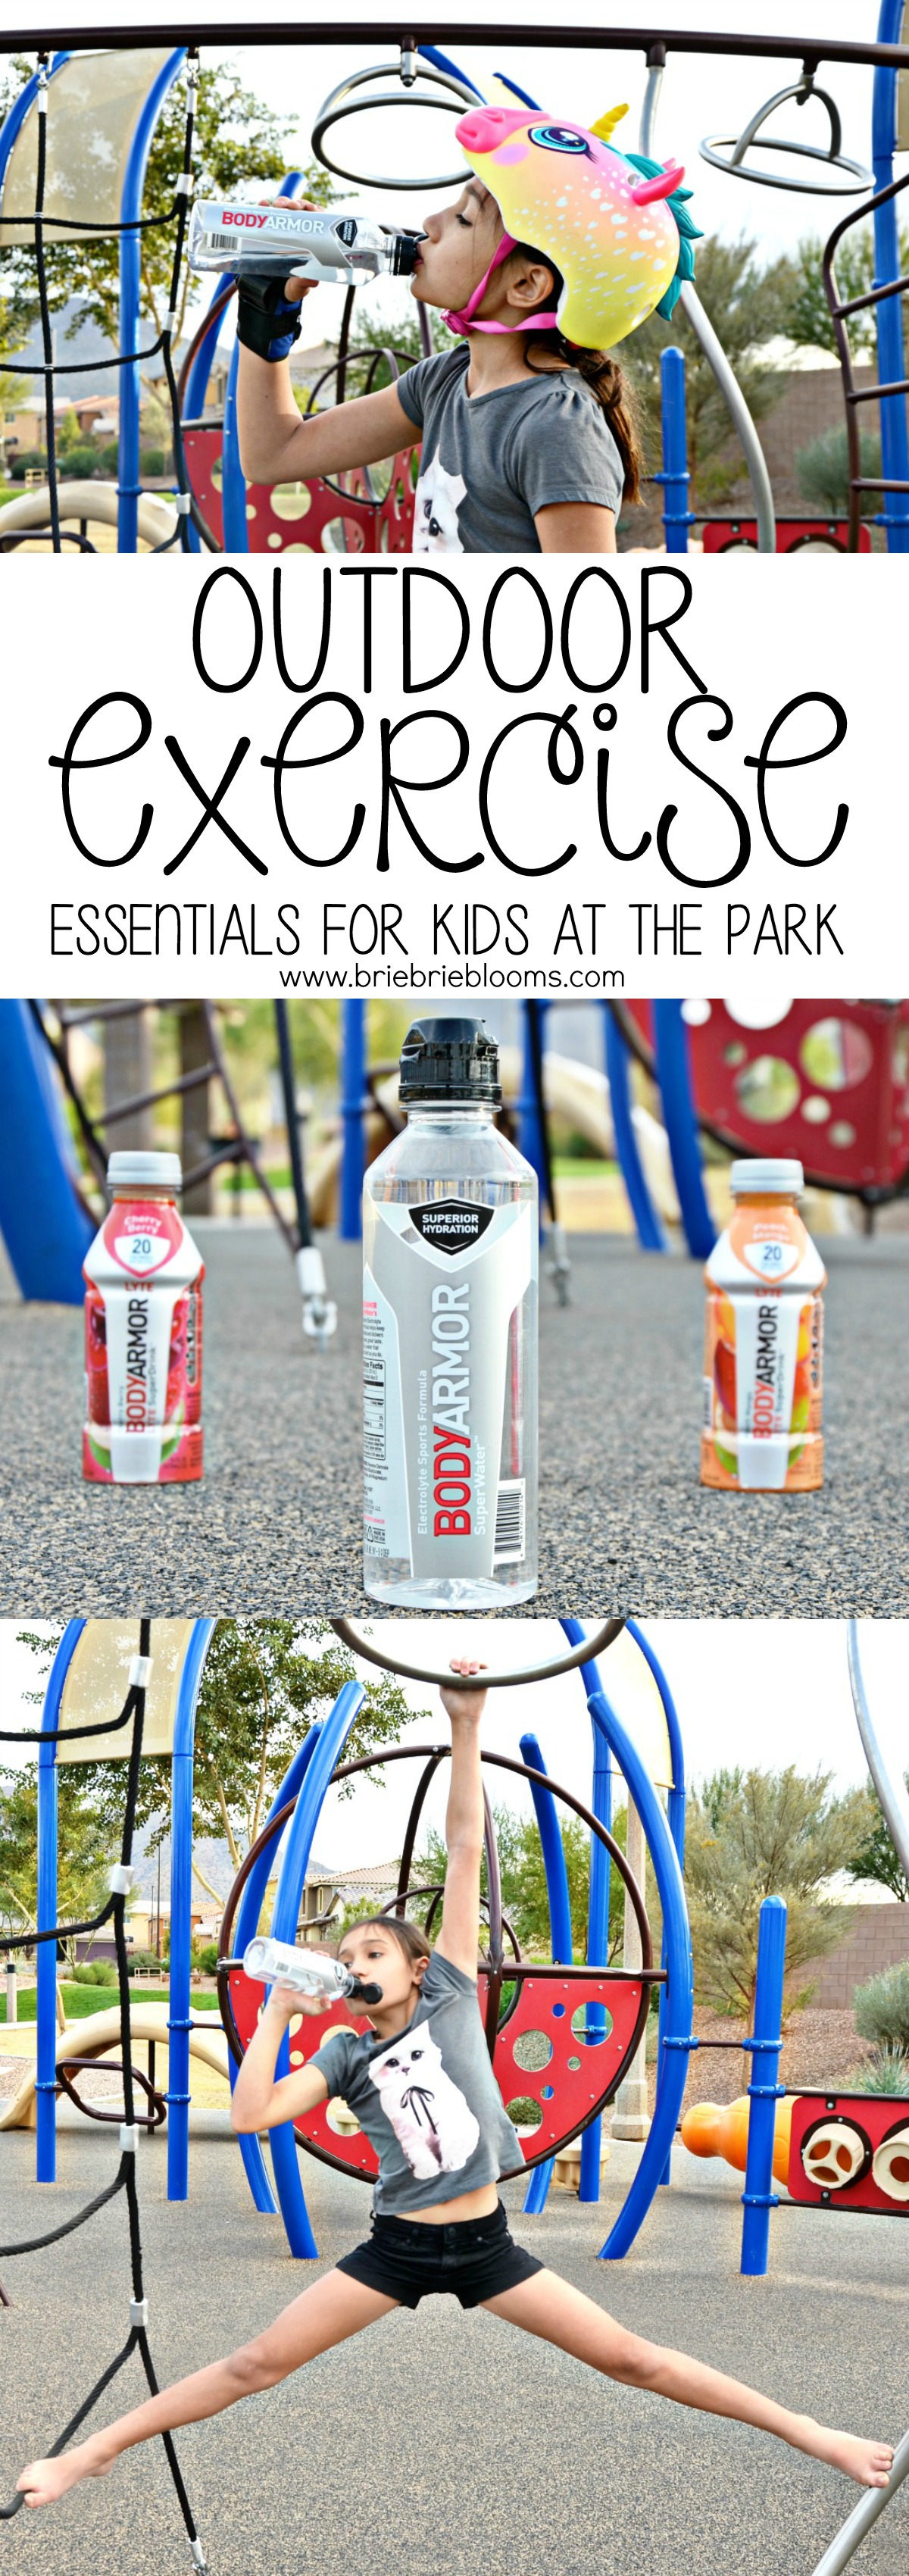 Outdoor exercise with essentials for kids at the park include protective gear, differing forms of transportation and drinks for hydration.